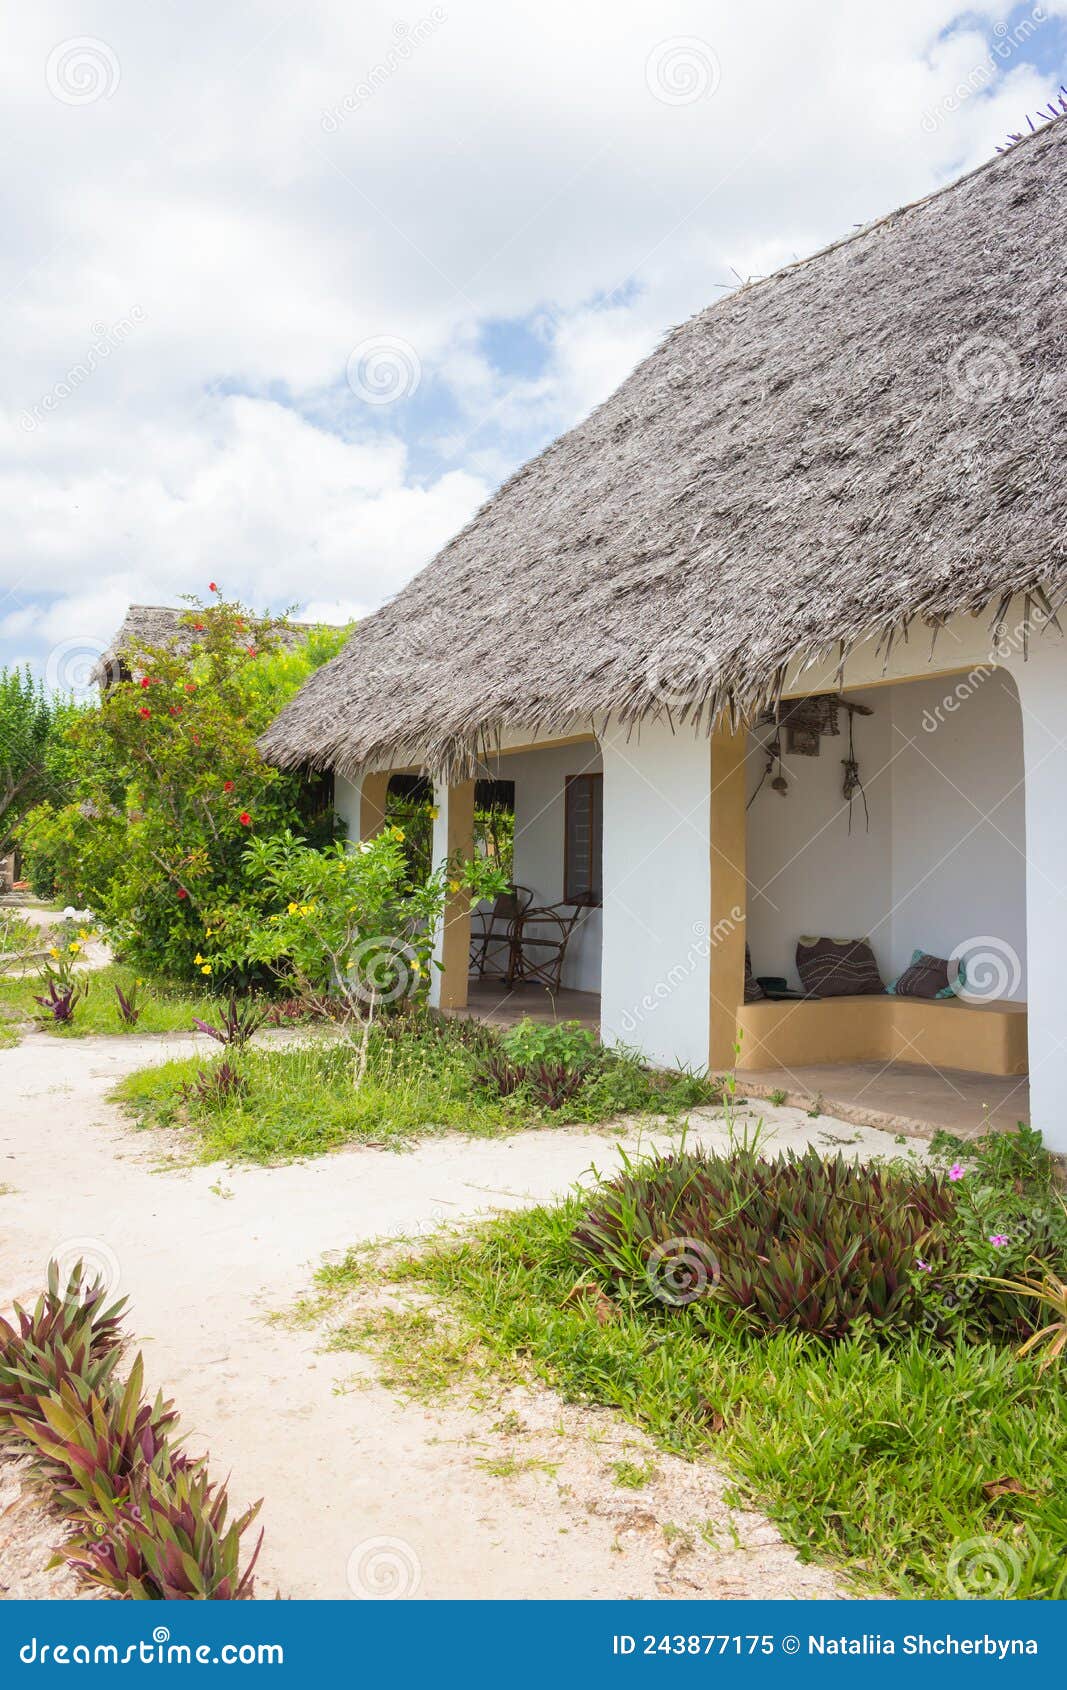 hotel cottage in tropical resort. rural cabin in tropics. tourist bungalow in exotic garden. summer vacations in africa.